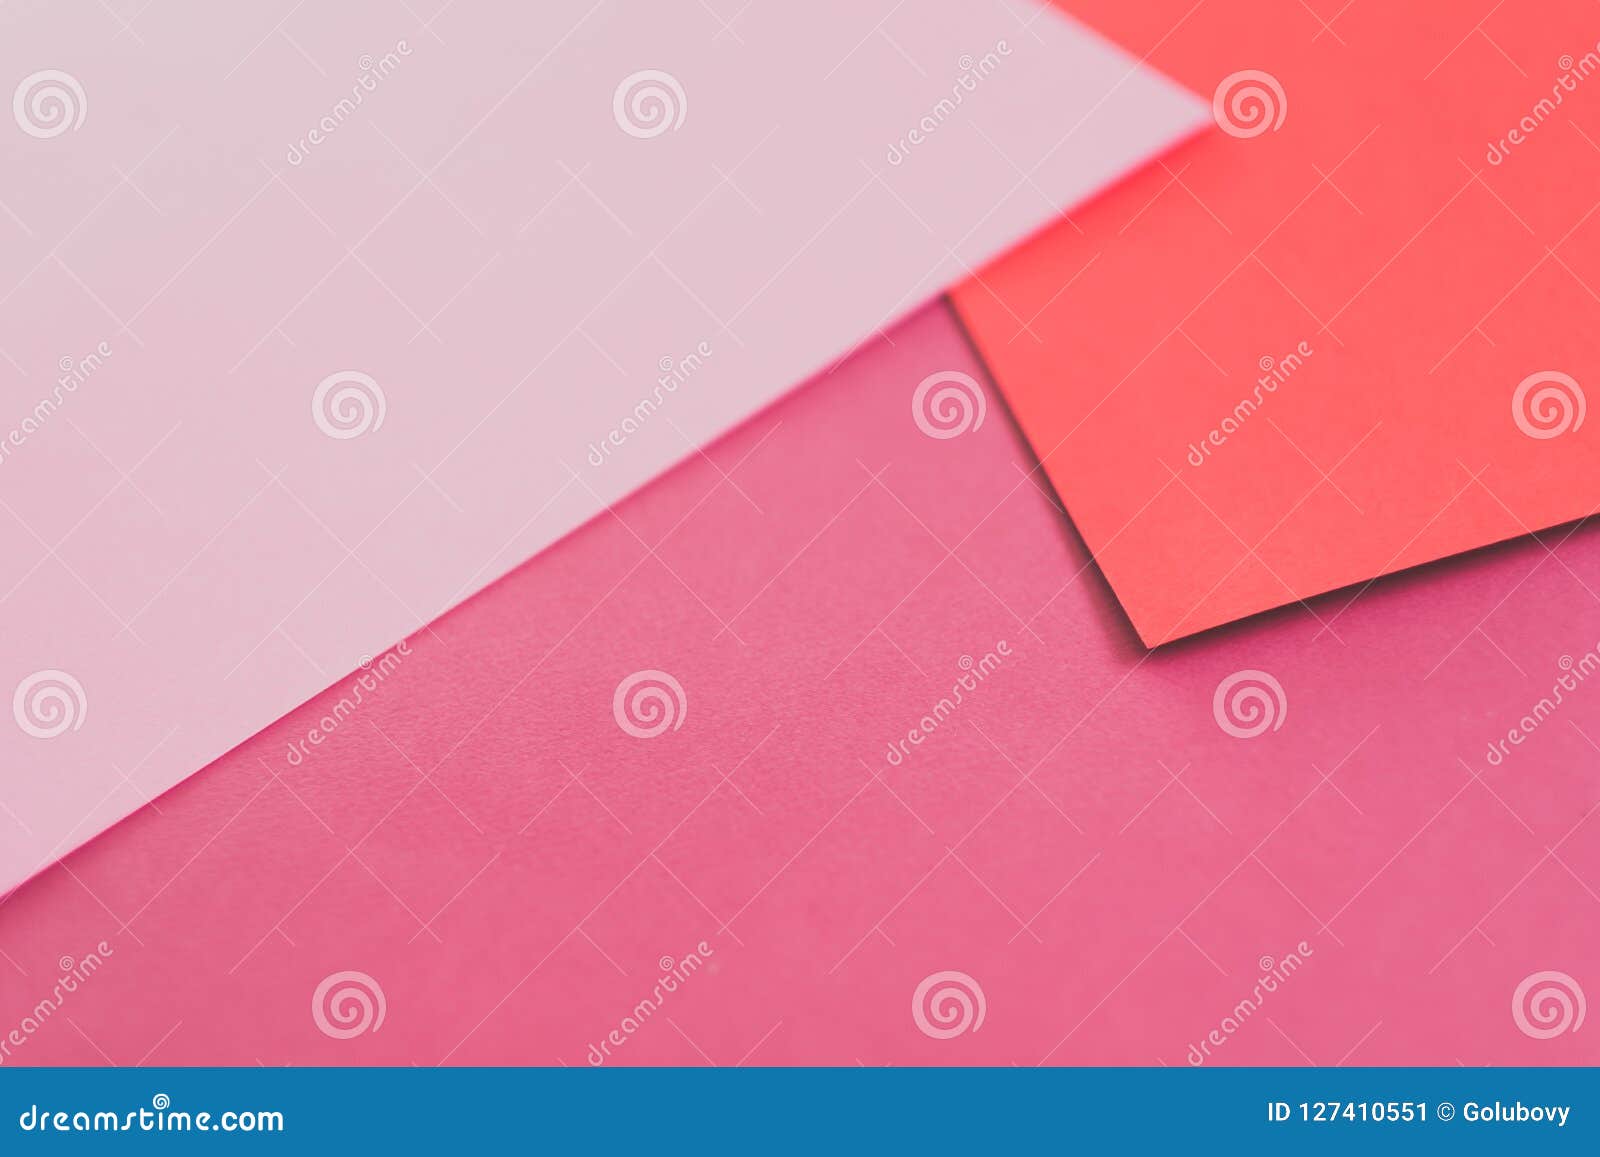 Construction Paper Collage Background Pink Layers Stock Image - Image of  collage, layers: 127410551